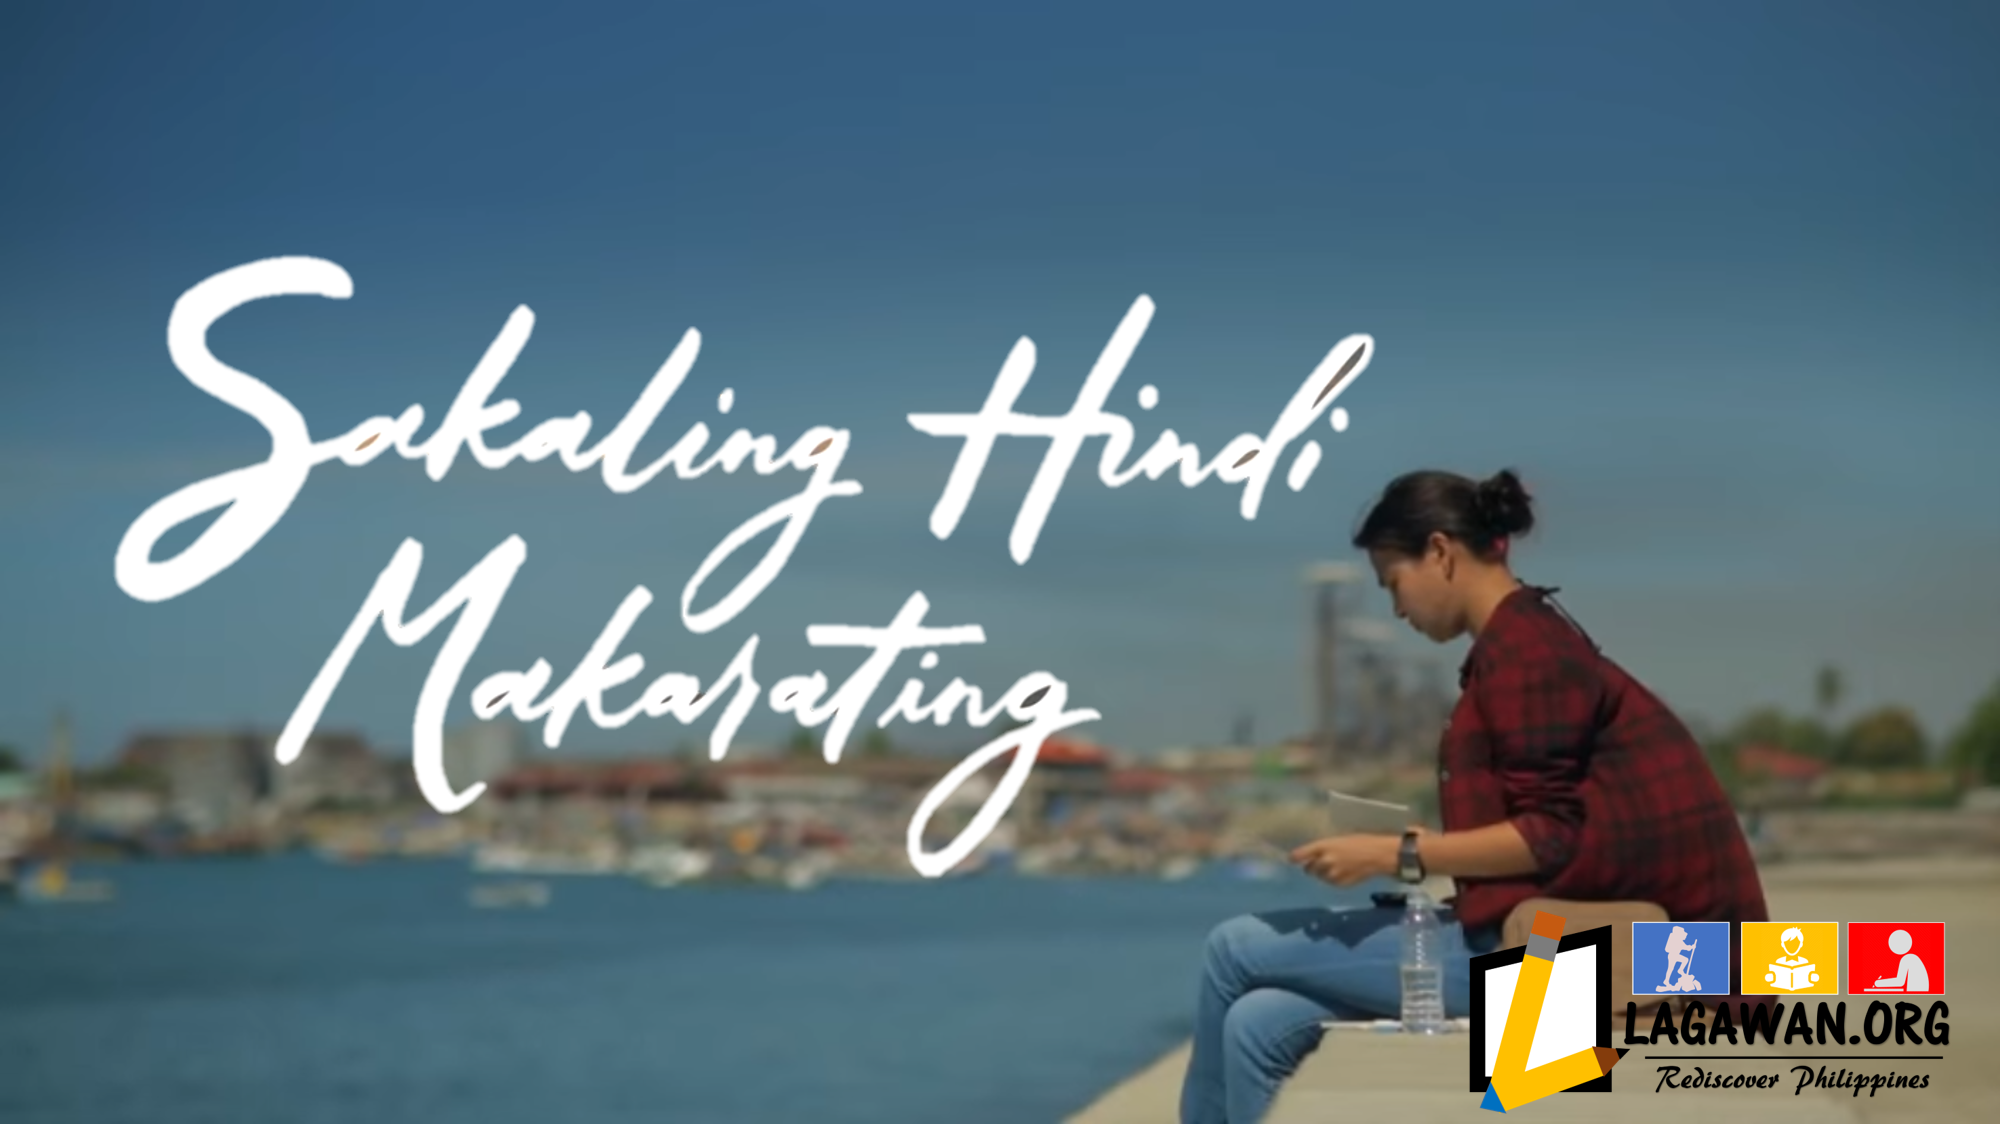 Kung Sakaling Hindi Makarating: A Movie For Travellers and Soul-Seekers